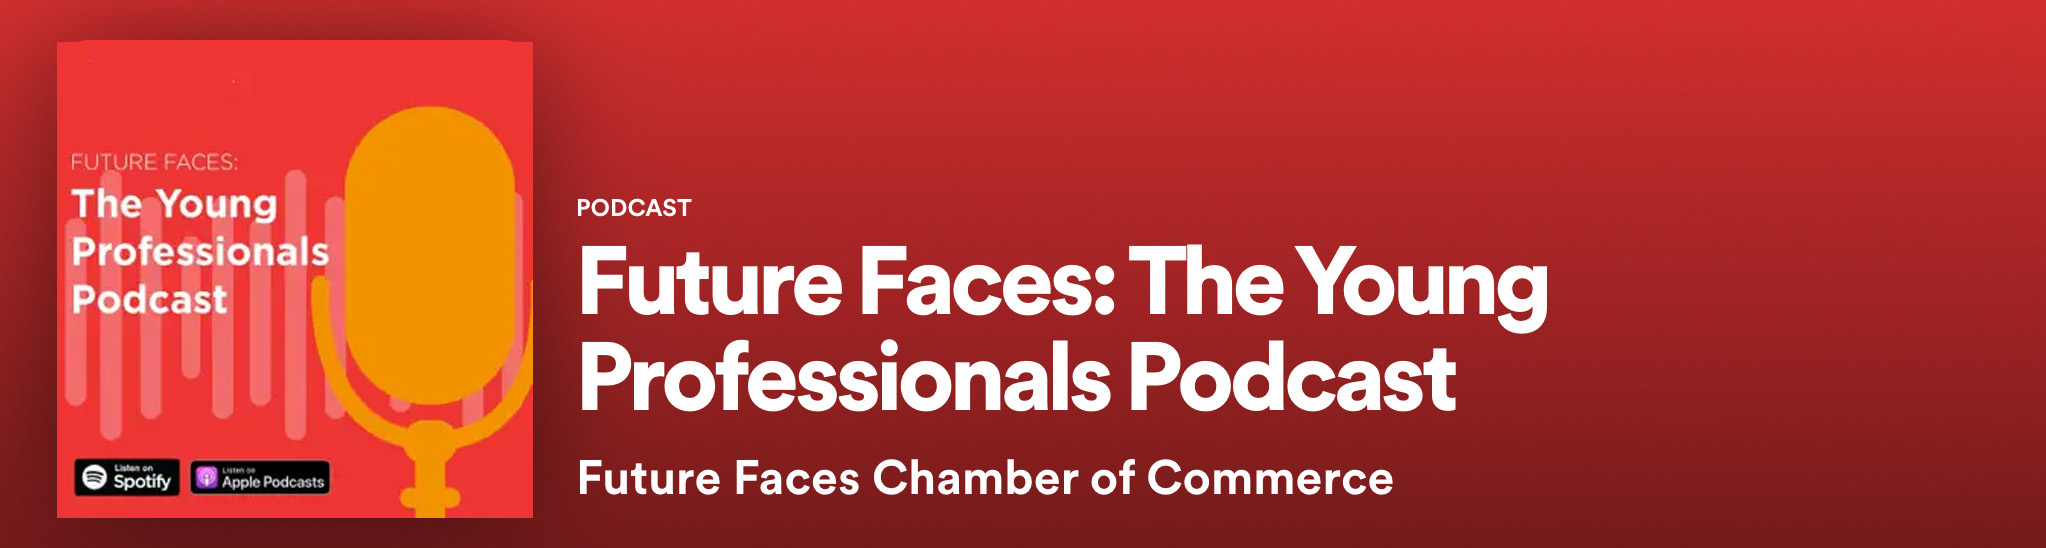 future-faces-podcast-banner.jpg